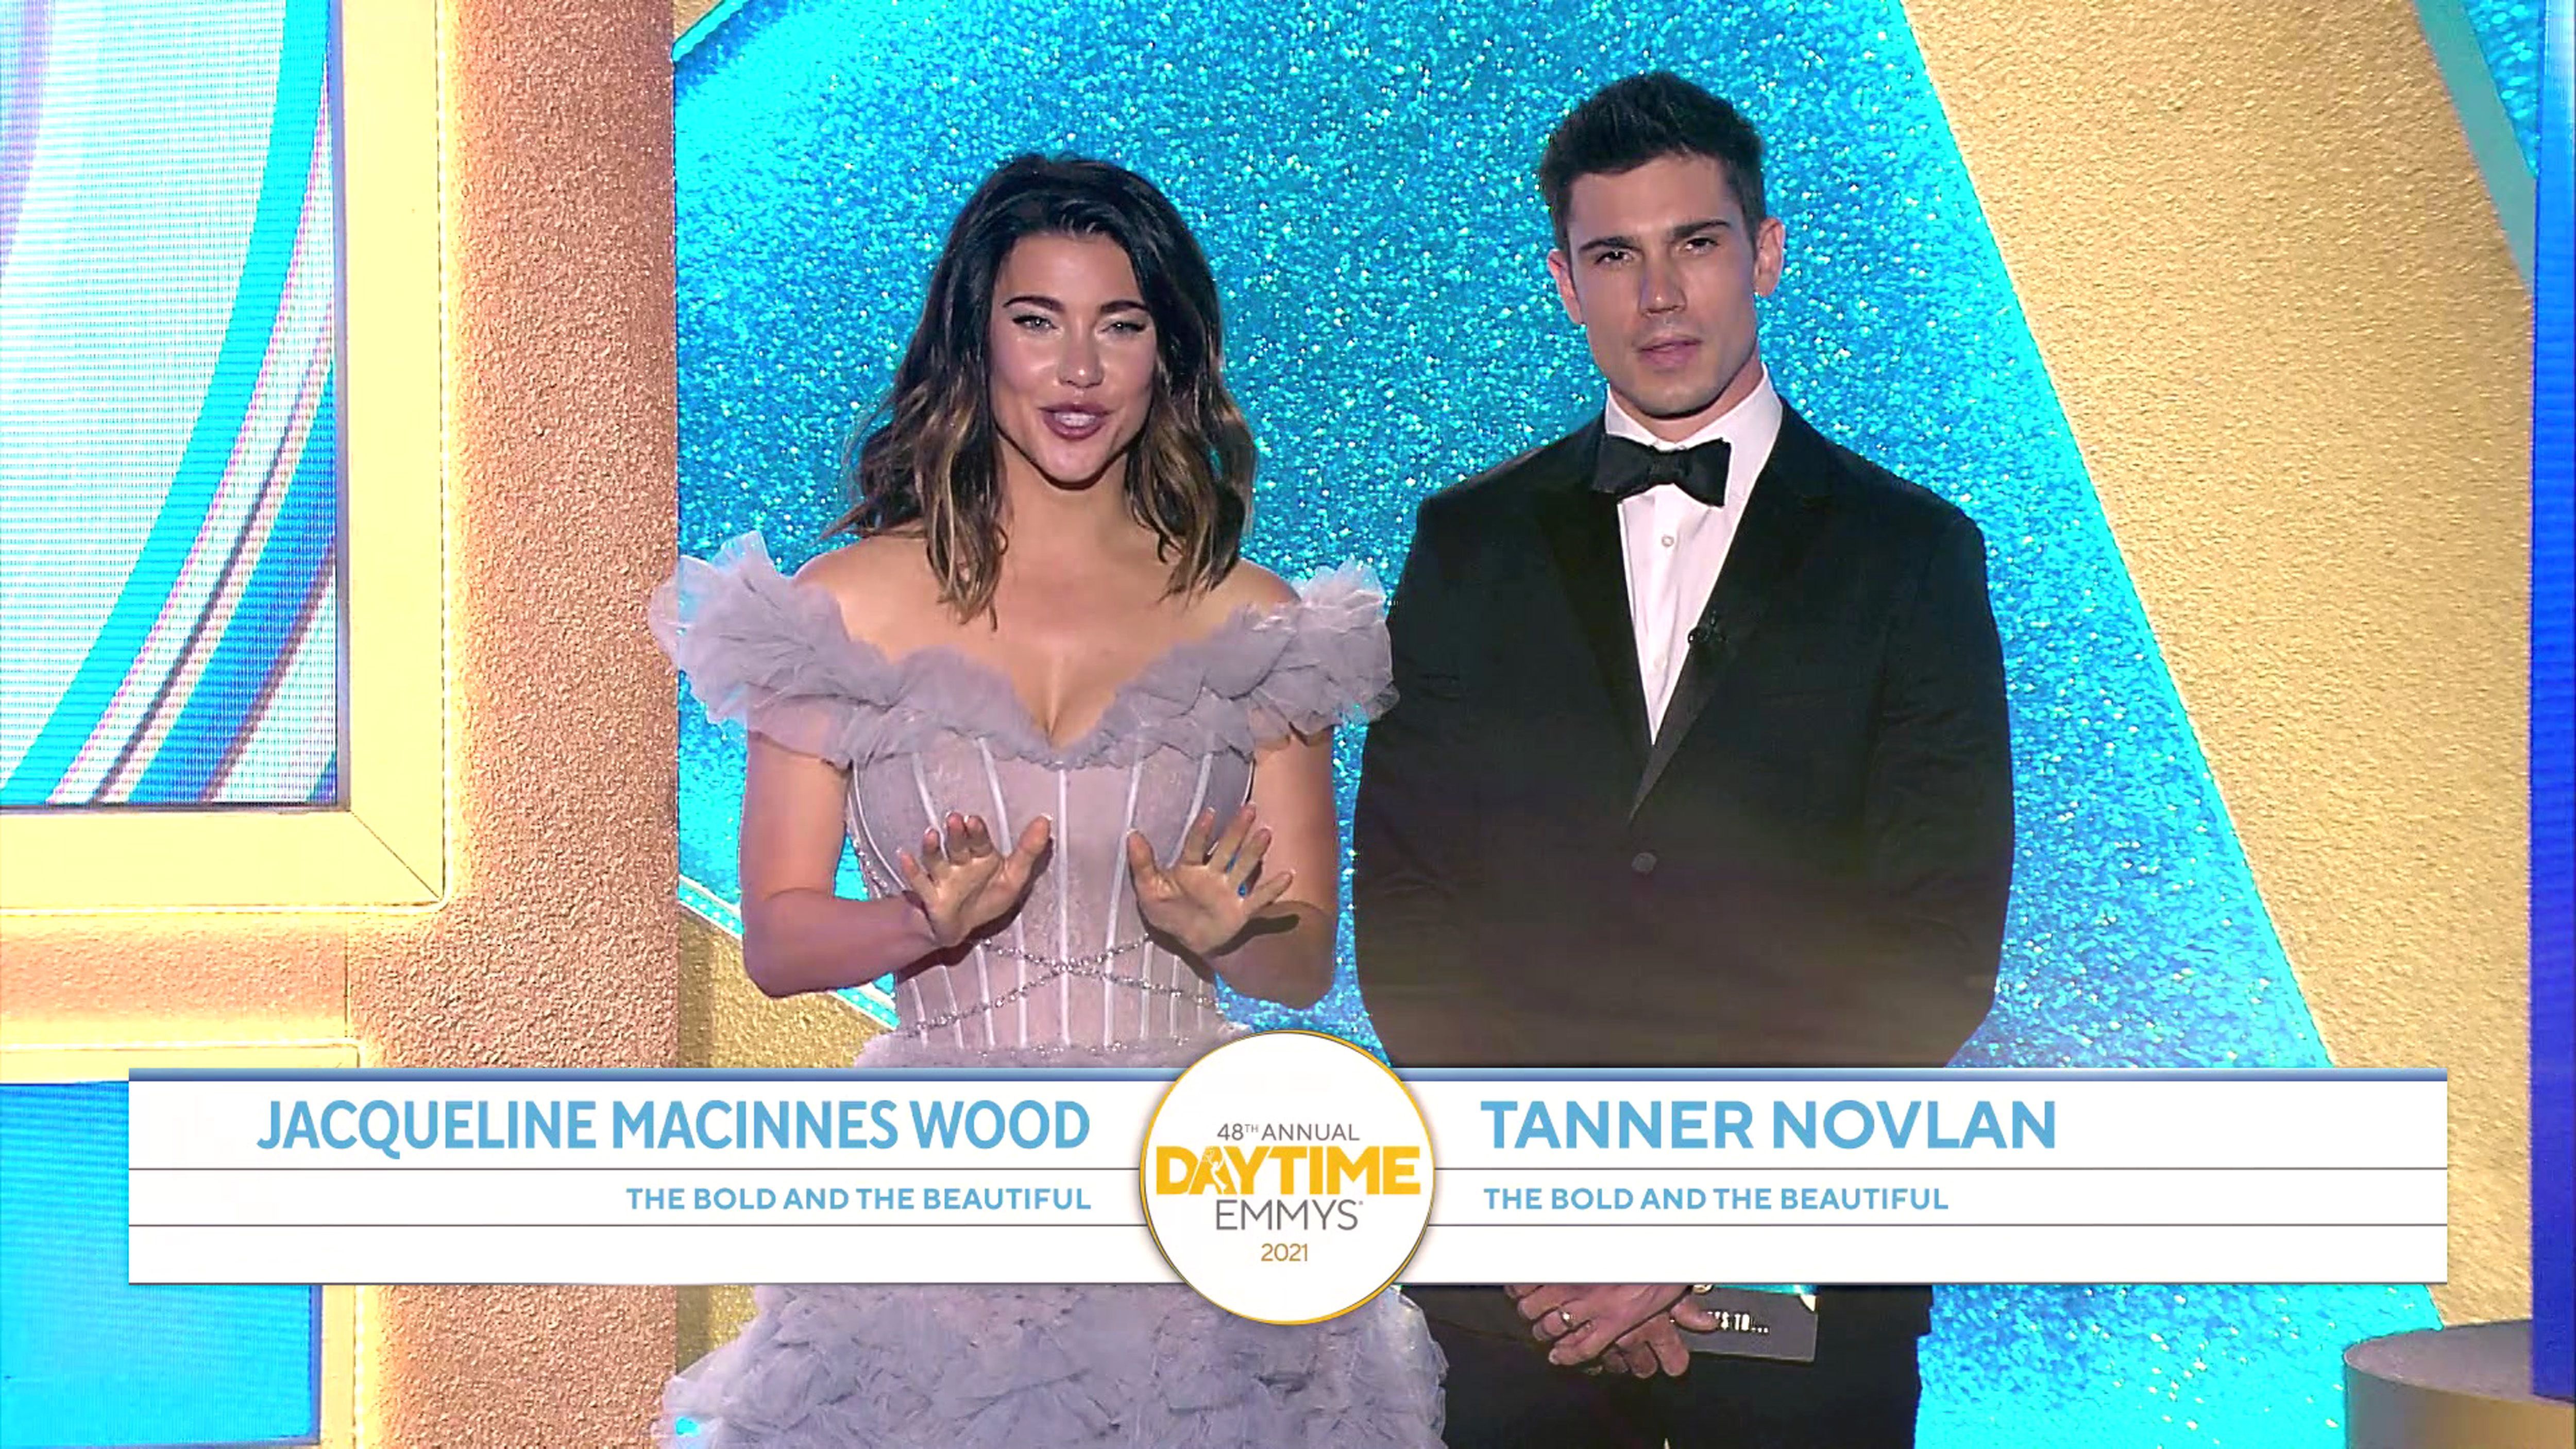 'The Bold and the Beautiful' actor Jacqueline MacInnes Wood in a lavendar dress, and Tanner Novlan in a tuxedo; present an award at the Daytime Emmys.